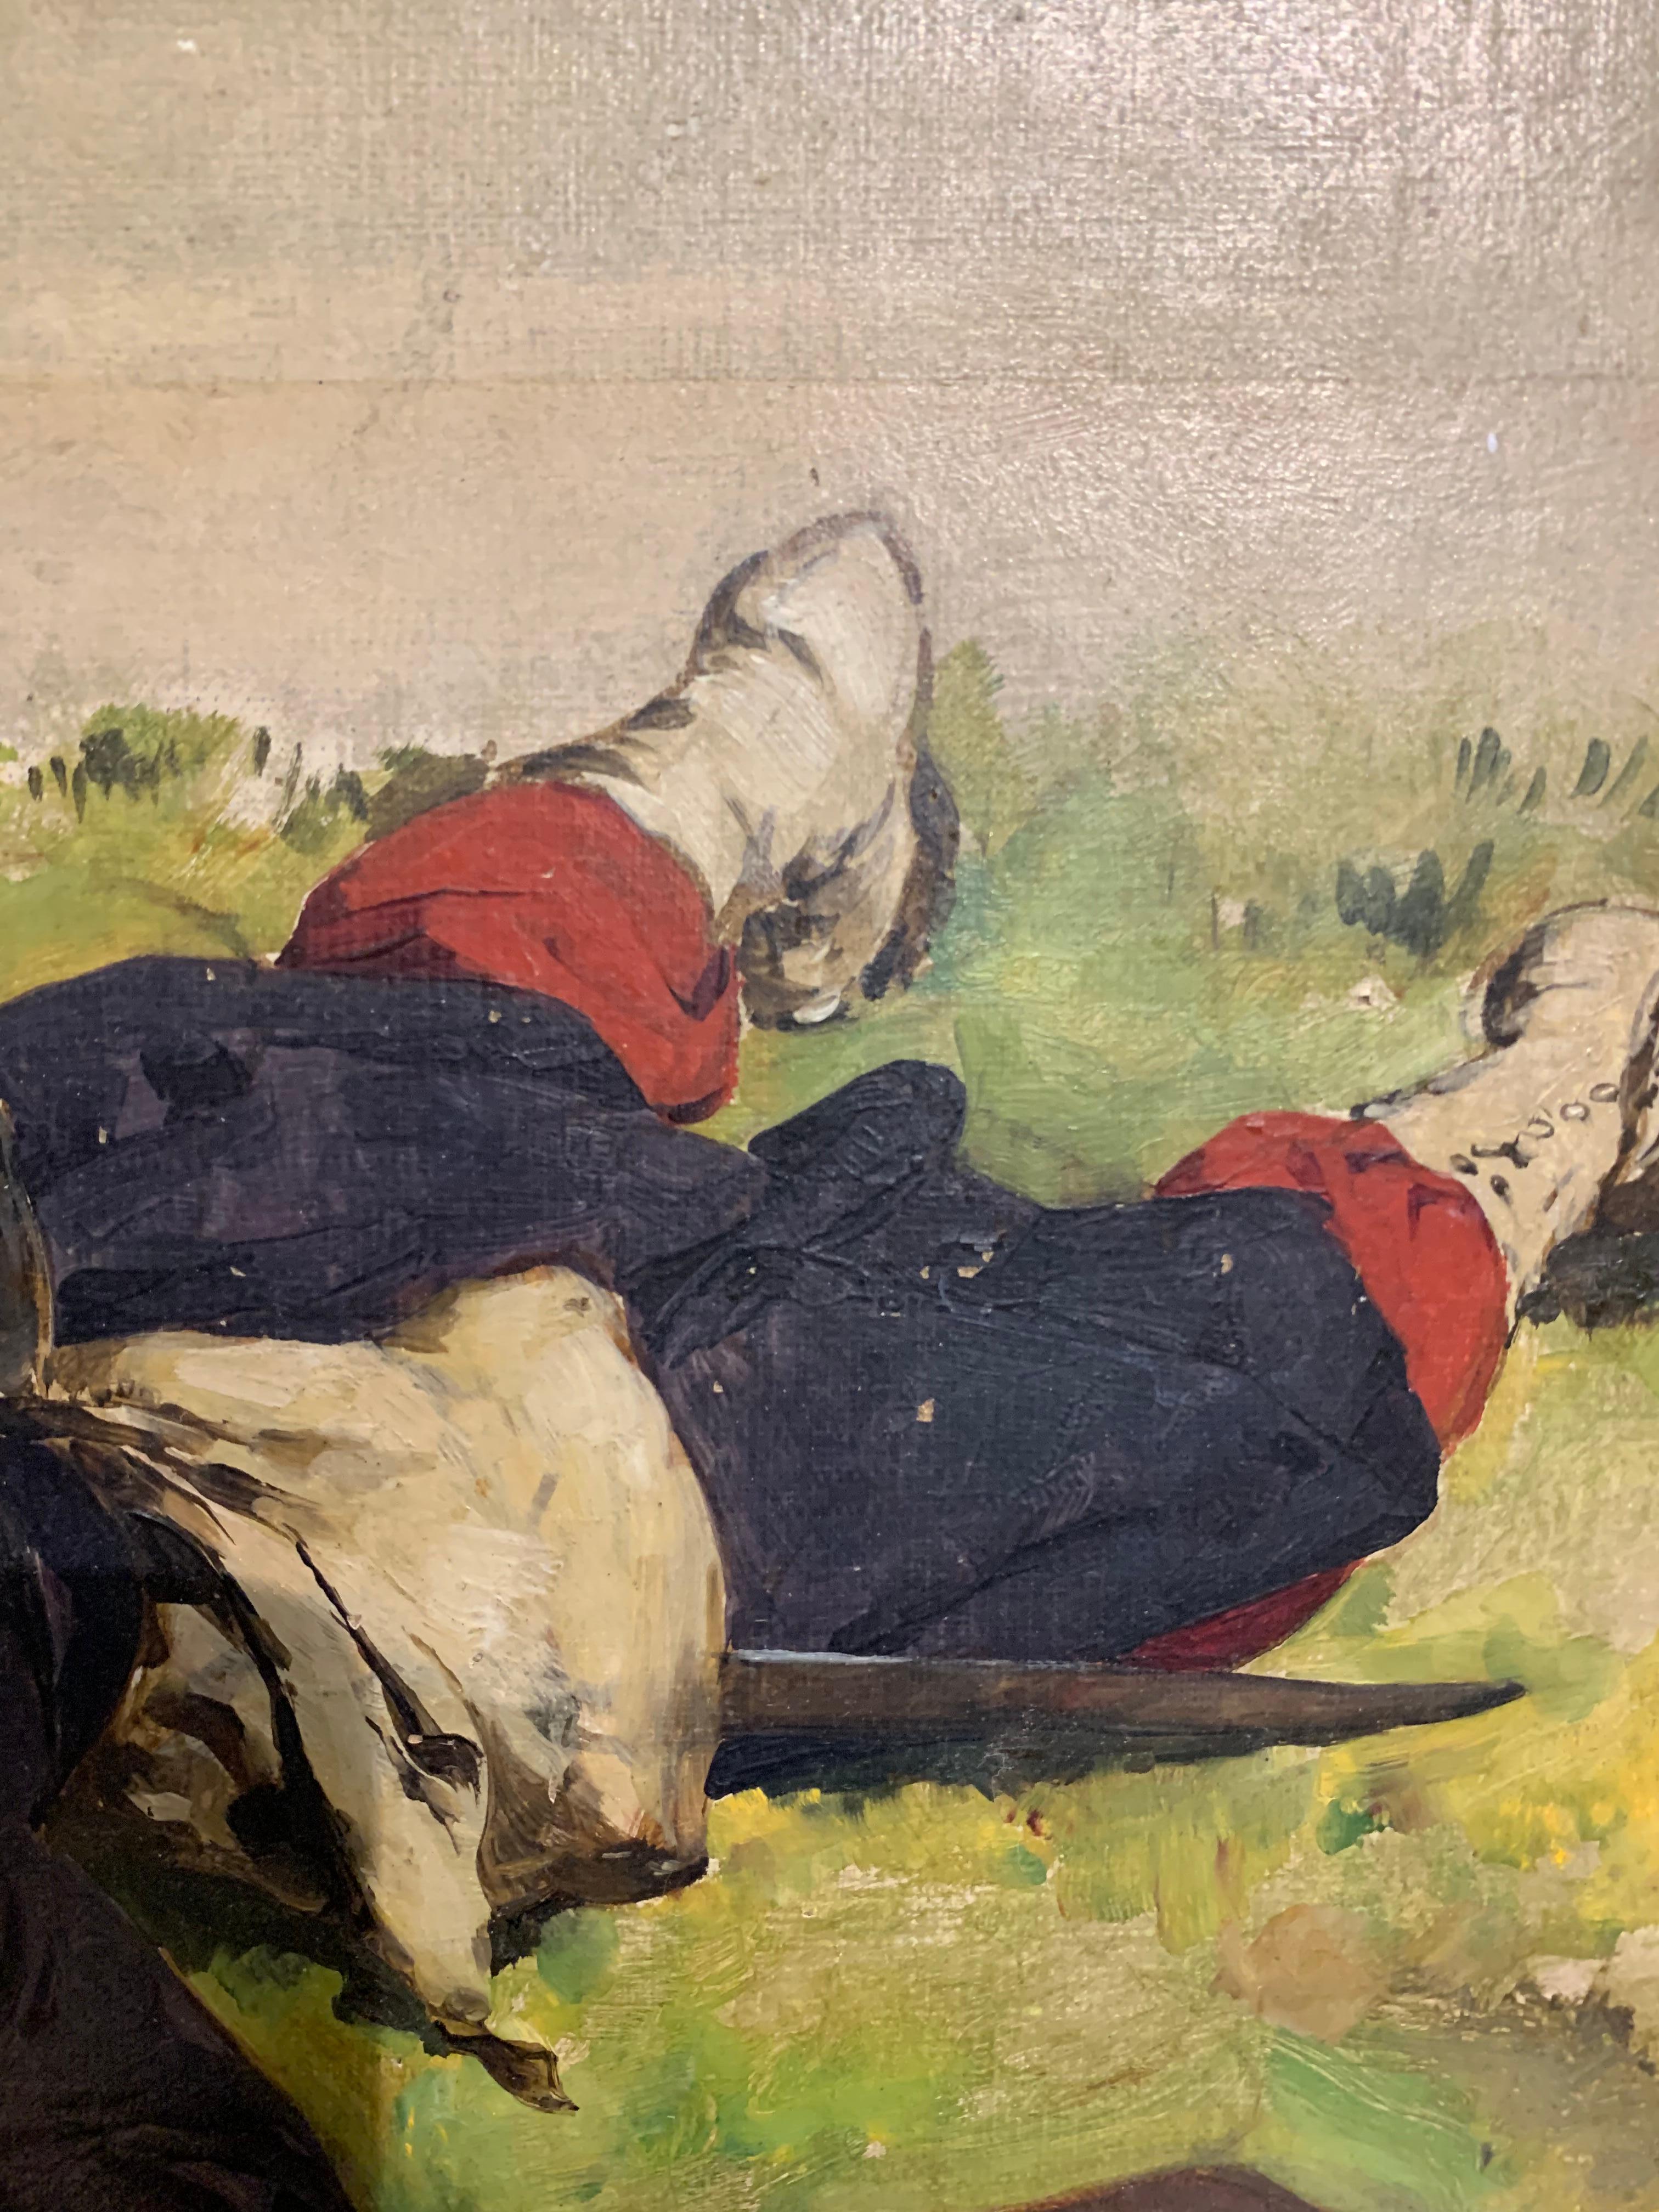 Louis Braun (1836 - 1916) - a study of a dead French soldier, ca. 1870
Technique: oil on canvas glued to cardboard.
An old adhesive label bearing the ink writing 